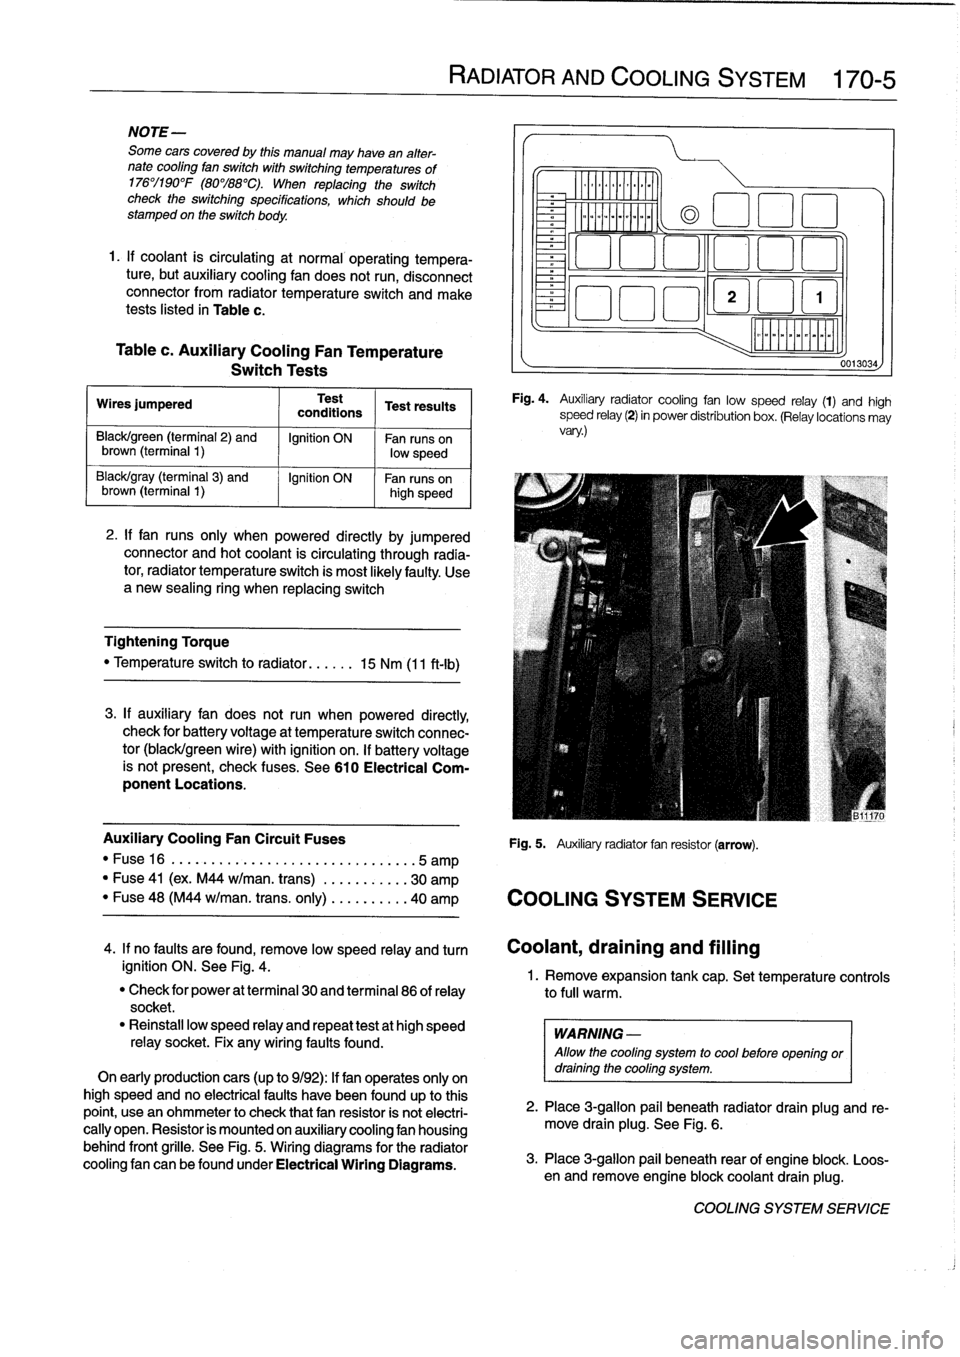 BMW 328i 1992 E36 Workshop Manual 
NOTE-

Some
cars
covered
by
this
manual
may
have
an
alter-
nate
cooling
fan
switchwith
switching
temperatures
of
176%190W
(80%88°C)
.
When
replacing
the
switch
check
theswitching
specifications,
whi